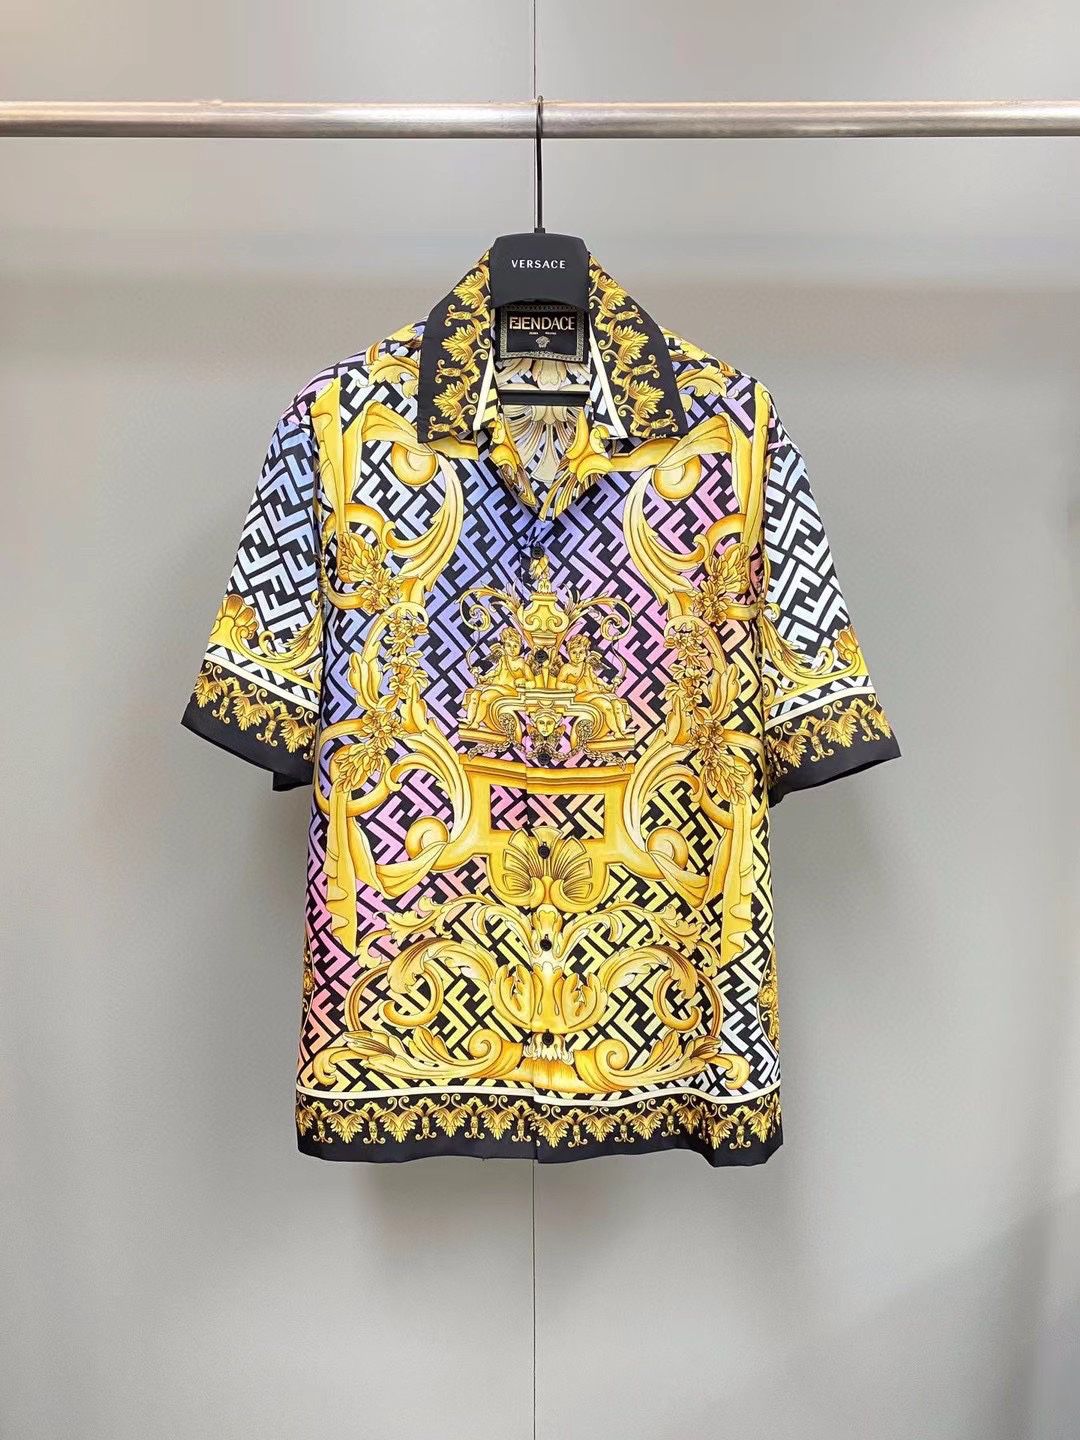 Versace Fendace Gold Baroque Silk Shirt for Sale in Tustin, CA - OfferUp